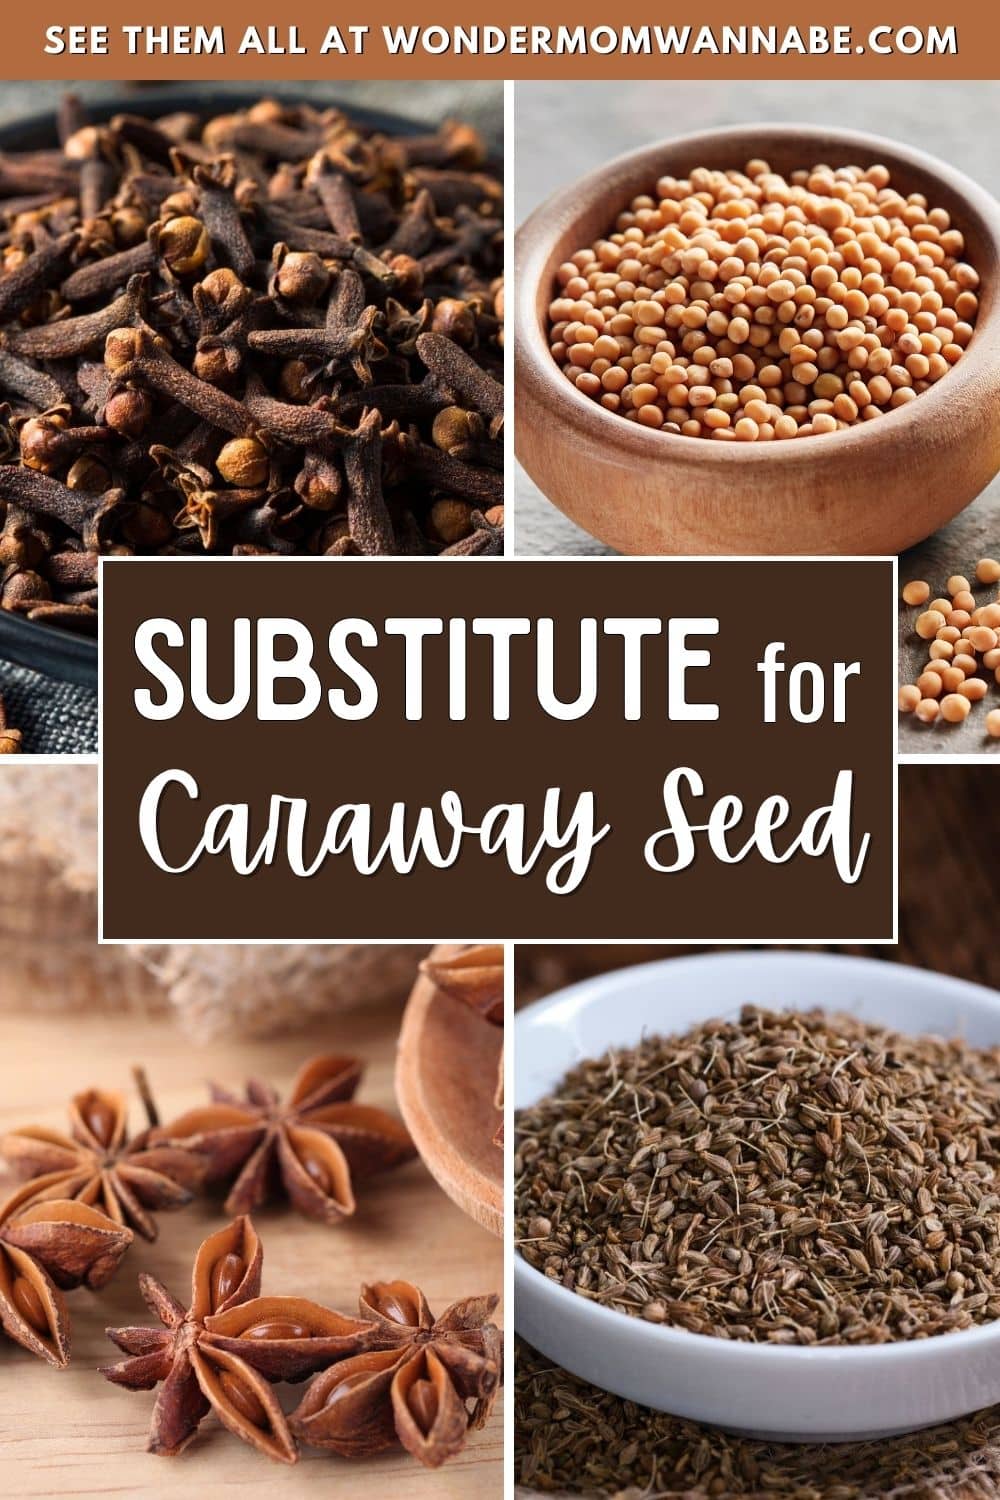 Substitute for Caraway Seeds.